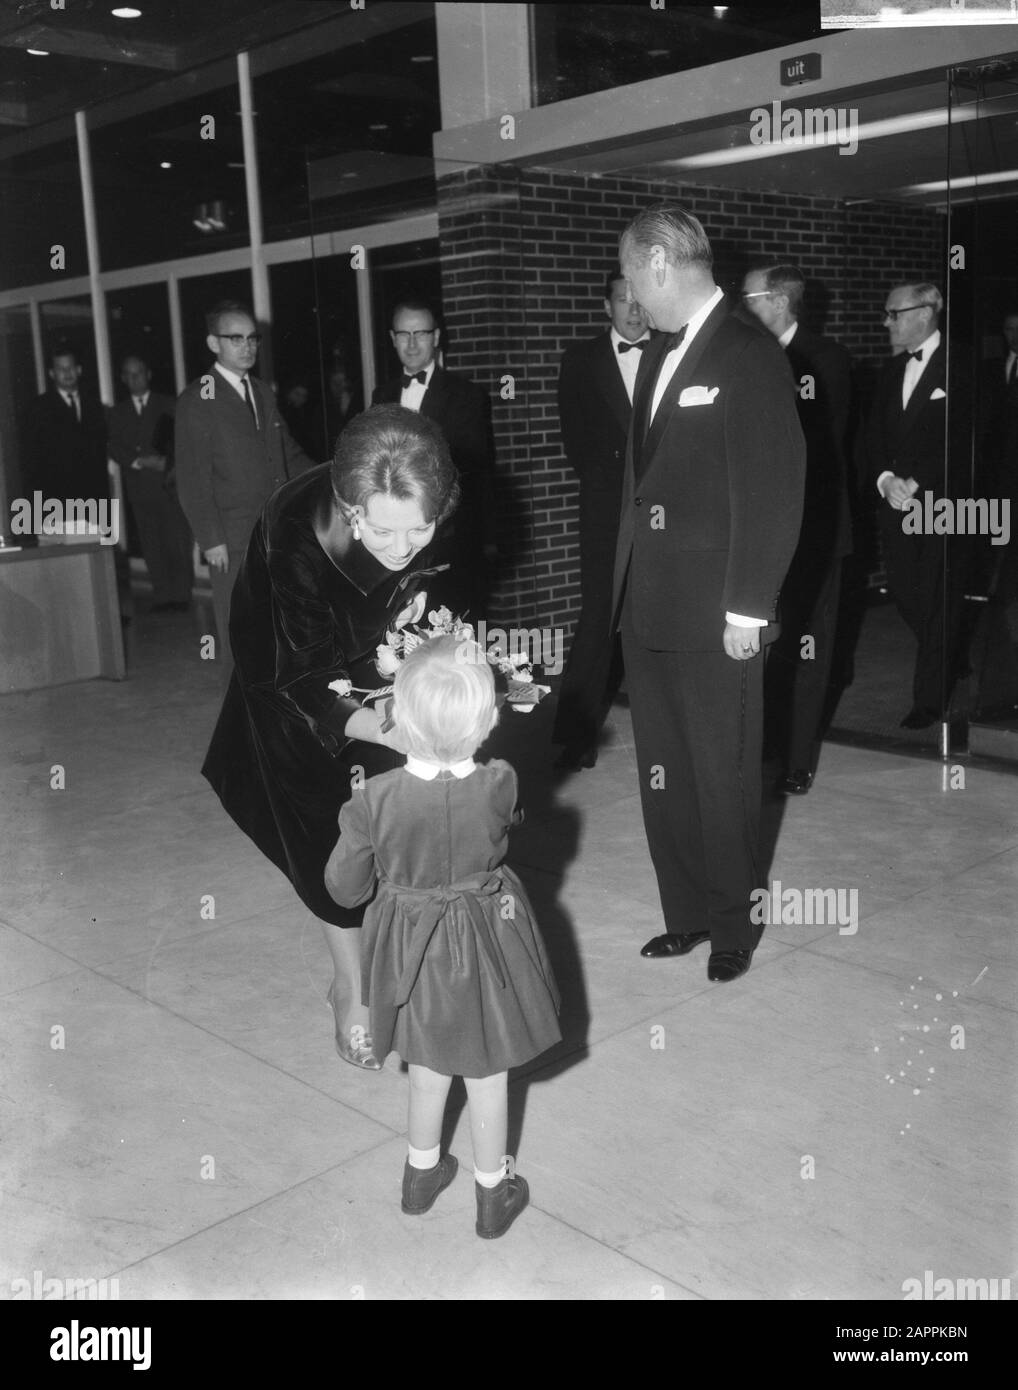 Princess Beatrix and her fiancée Claus von Amsberg at premiere of the film Tokyo Olympiad in Amsterdam  documentaries, princesses, premieres, film, Beatrix, princess Annotation: Documentary film directed by Kon Ichikawa about the 1964 Summer Olympics in Tokyo Date: 15 October 1965 Location: Amsterdam, Noord-Holland Keywords: documentaries, film, premieres, princesses Personal name: Beatrix, princess Stock Photo